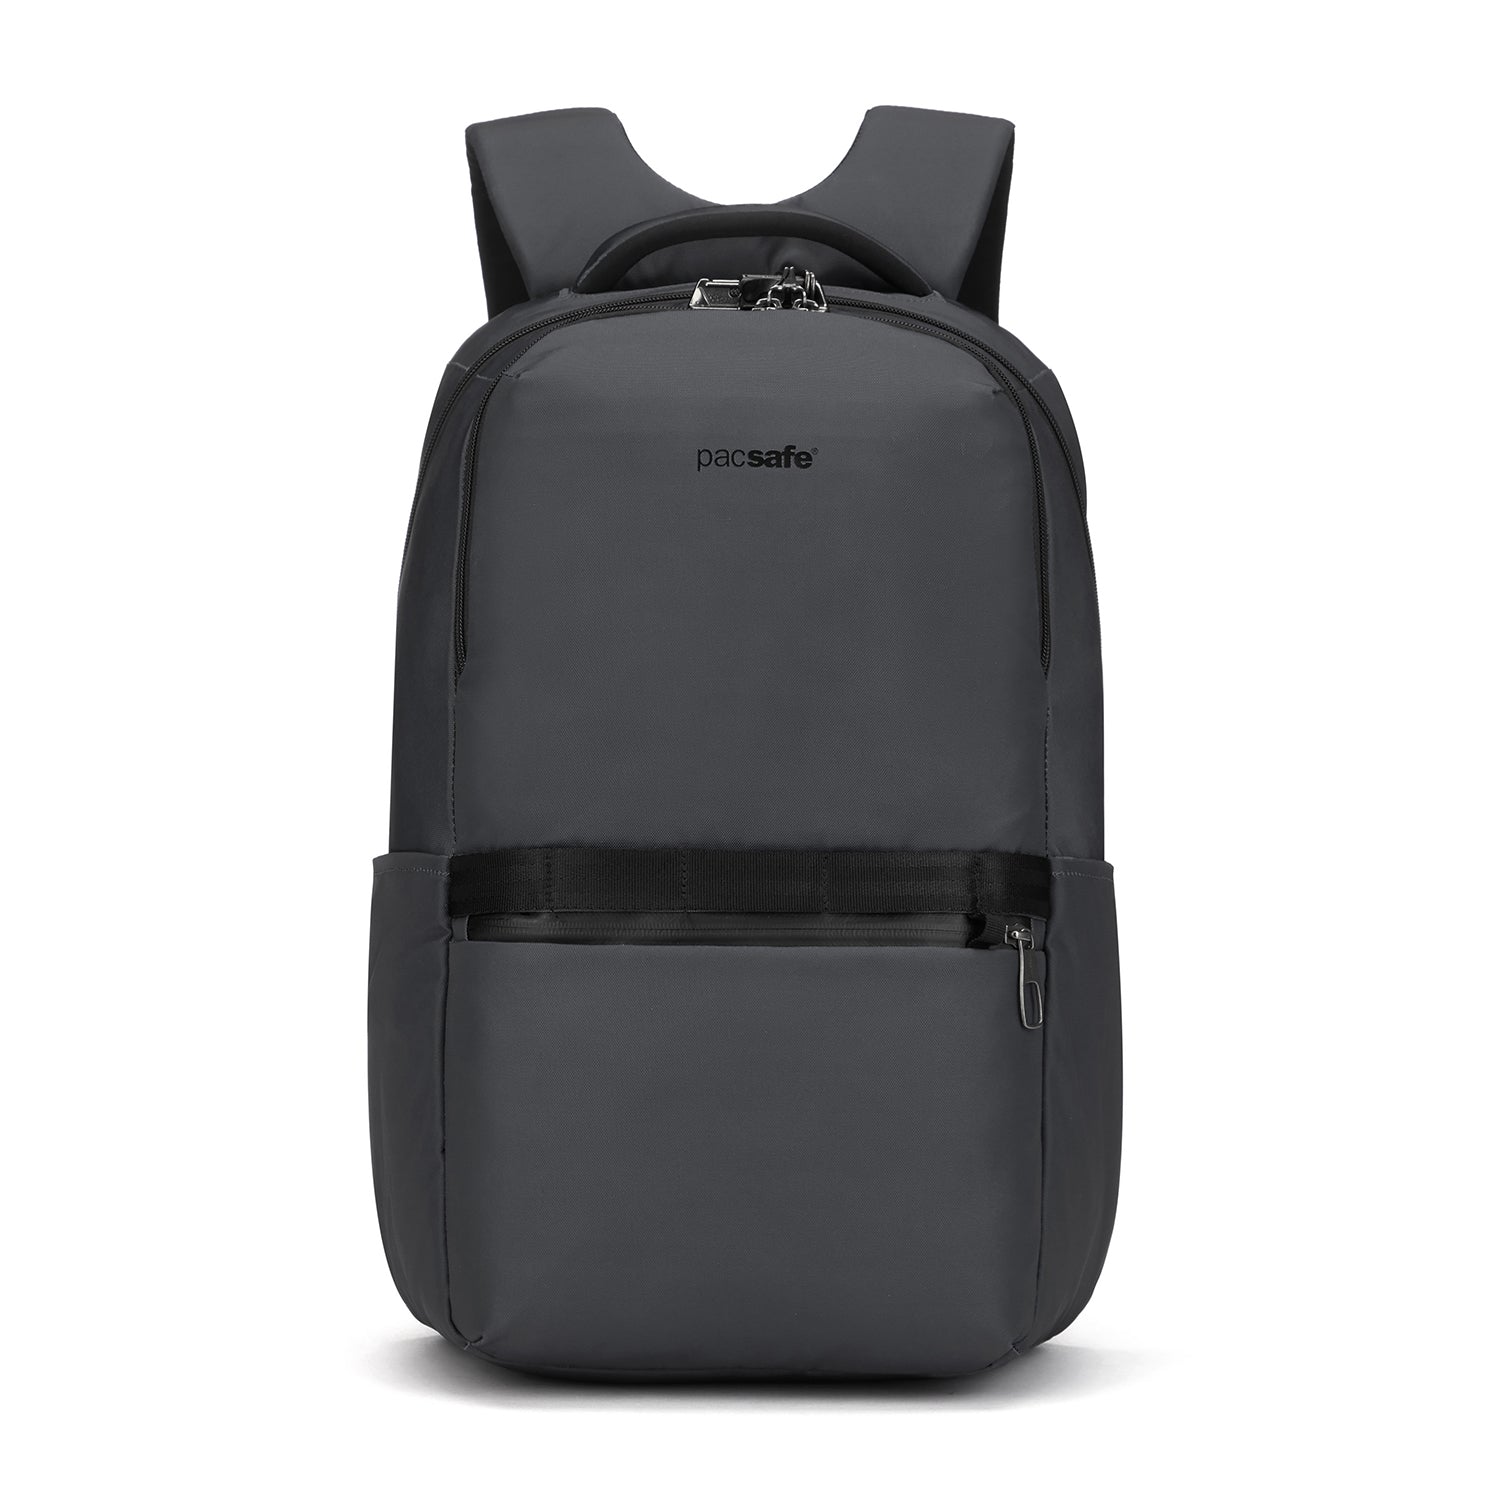 7 Minimal All-Black Backpacks for Urban Commuters I CARRYOLOGY